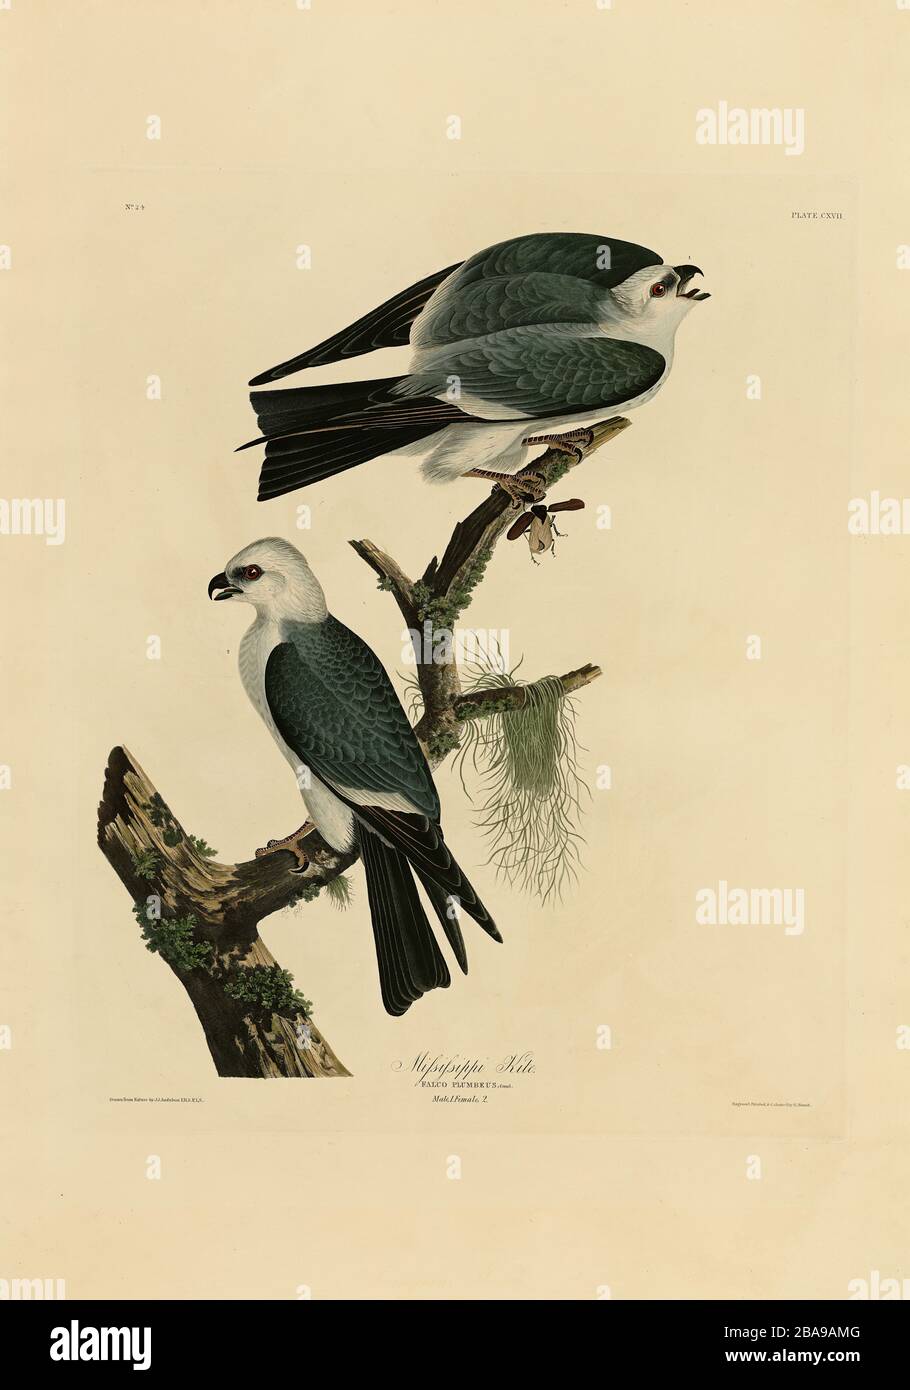 Plate 117 Mississippi Kite from The Birds of America folio (1827–1839) by John James Audubon - Very high resolution and quality edited image Stock Photo